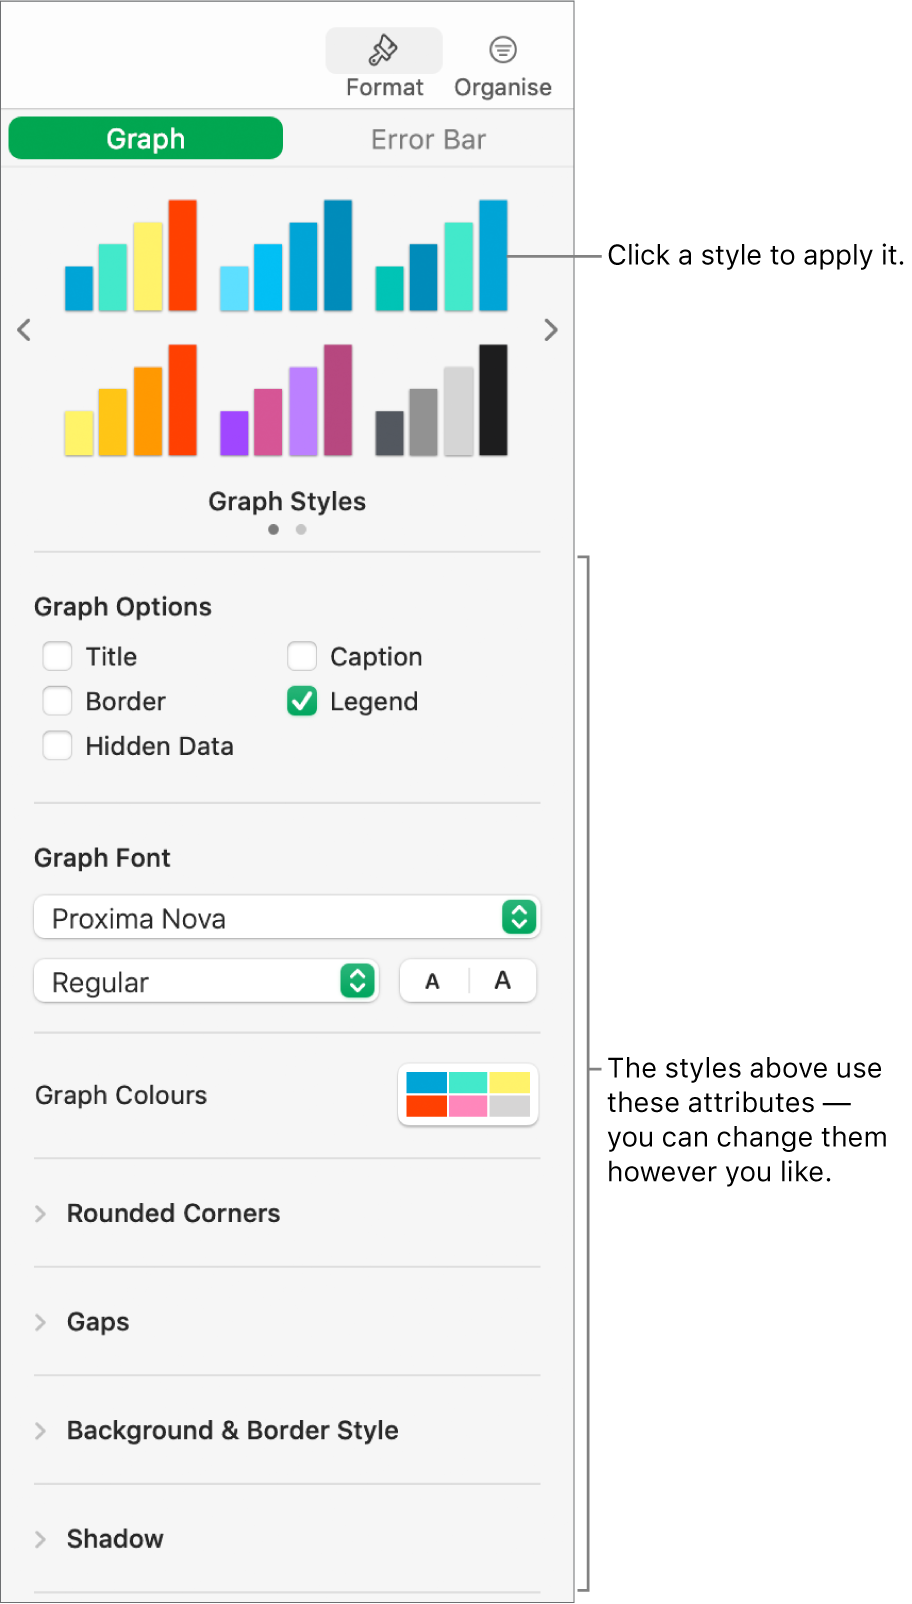 The Formatting sidebar showing the controls for formatting graphs.